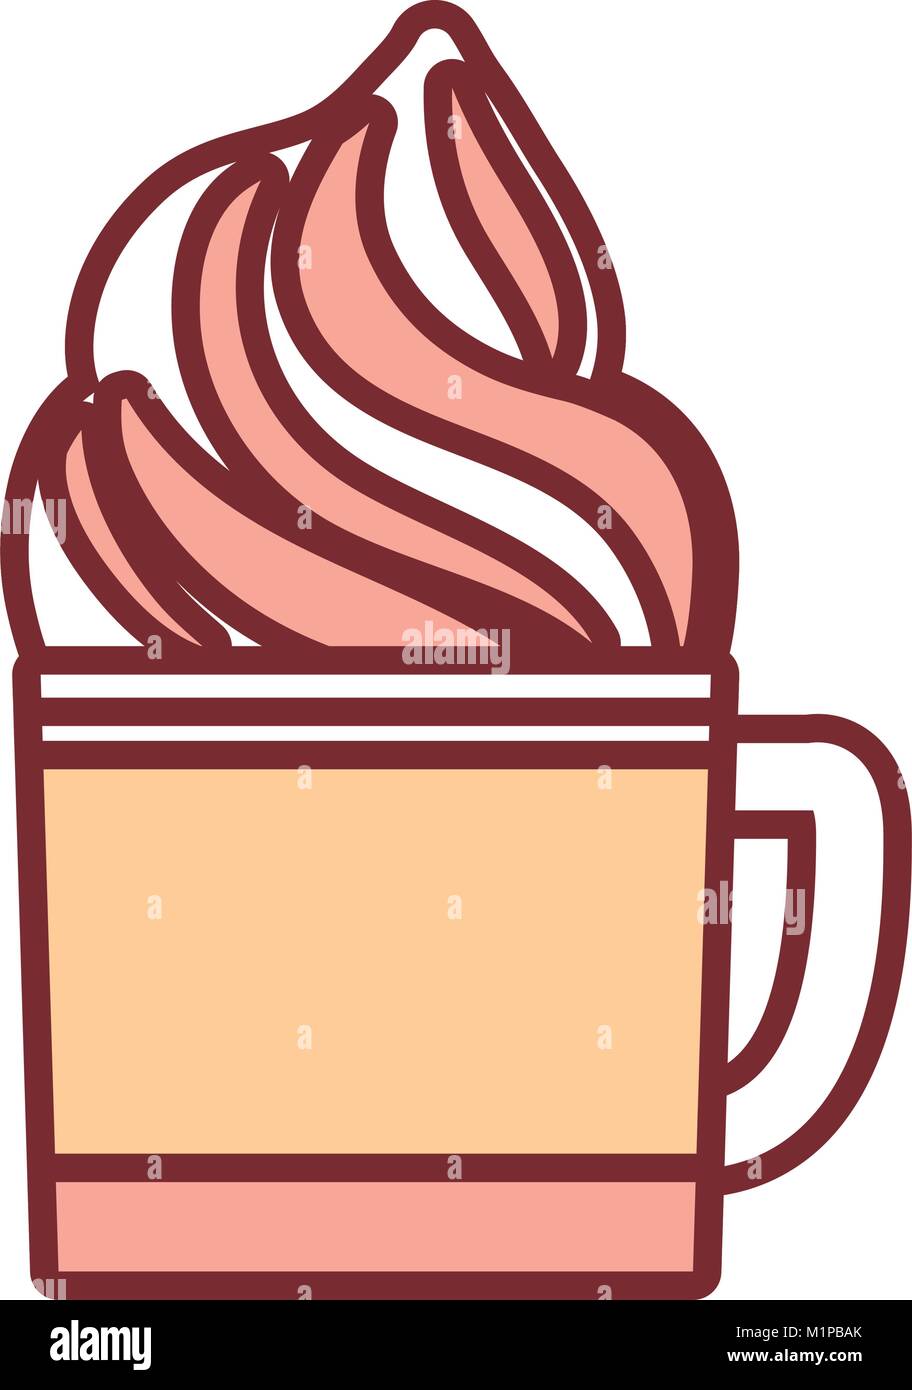 chocolate and whipped cream Stock Vector